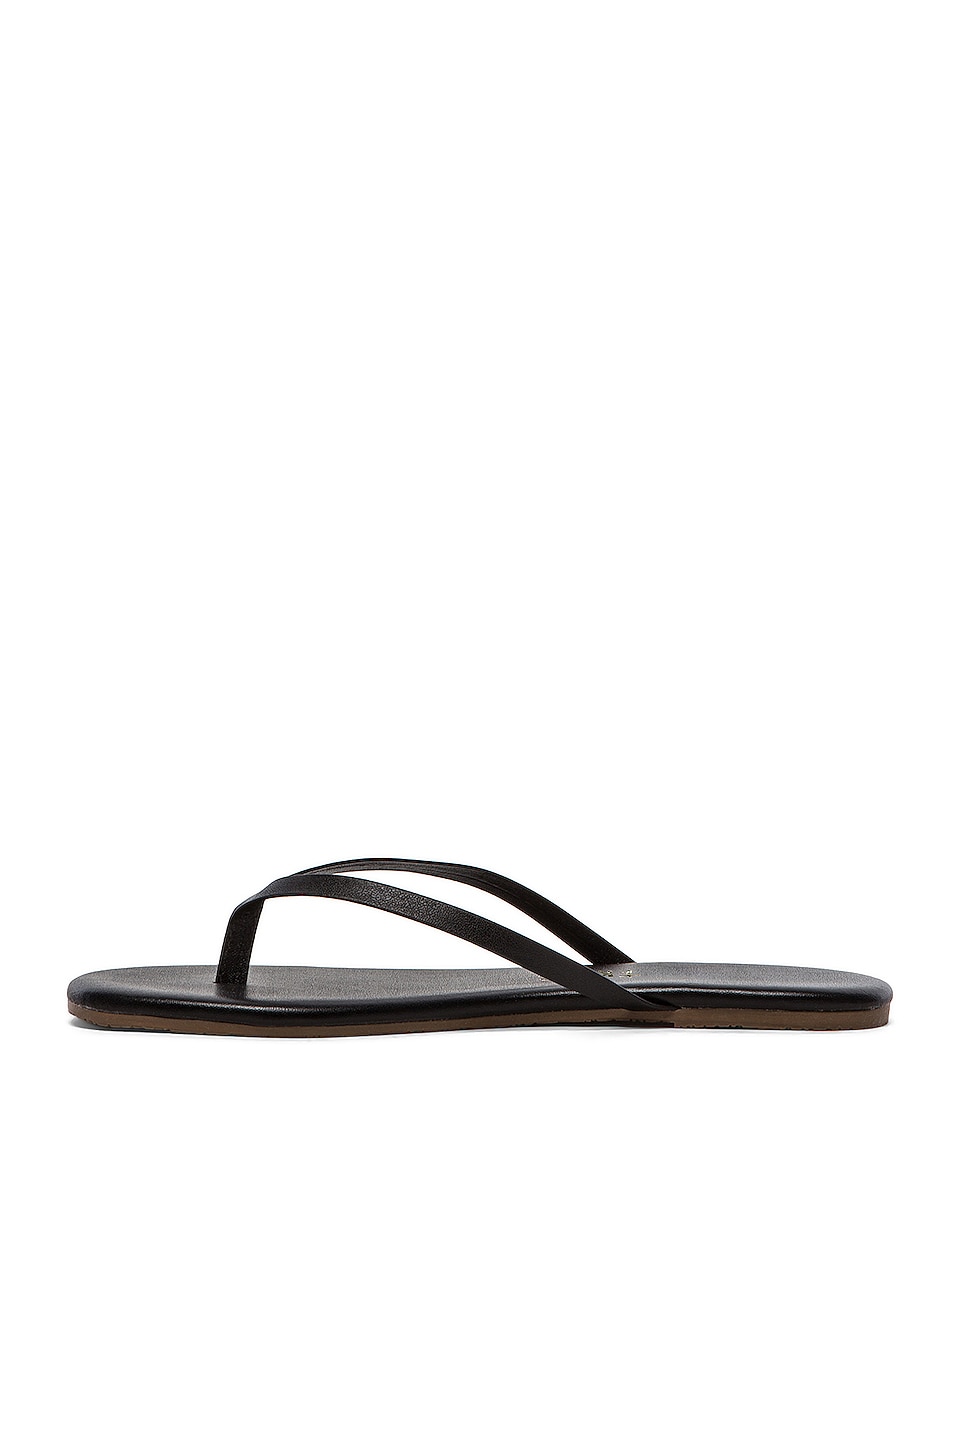 TKEES Liners Flip Flop in Sable | REVOLVE